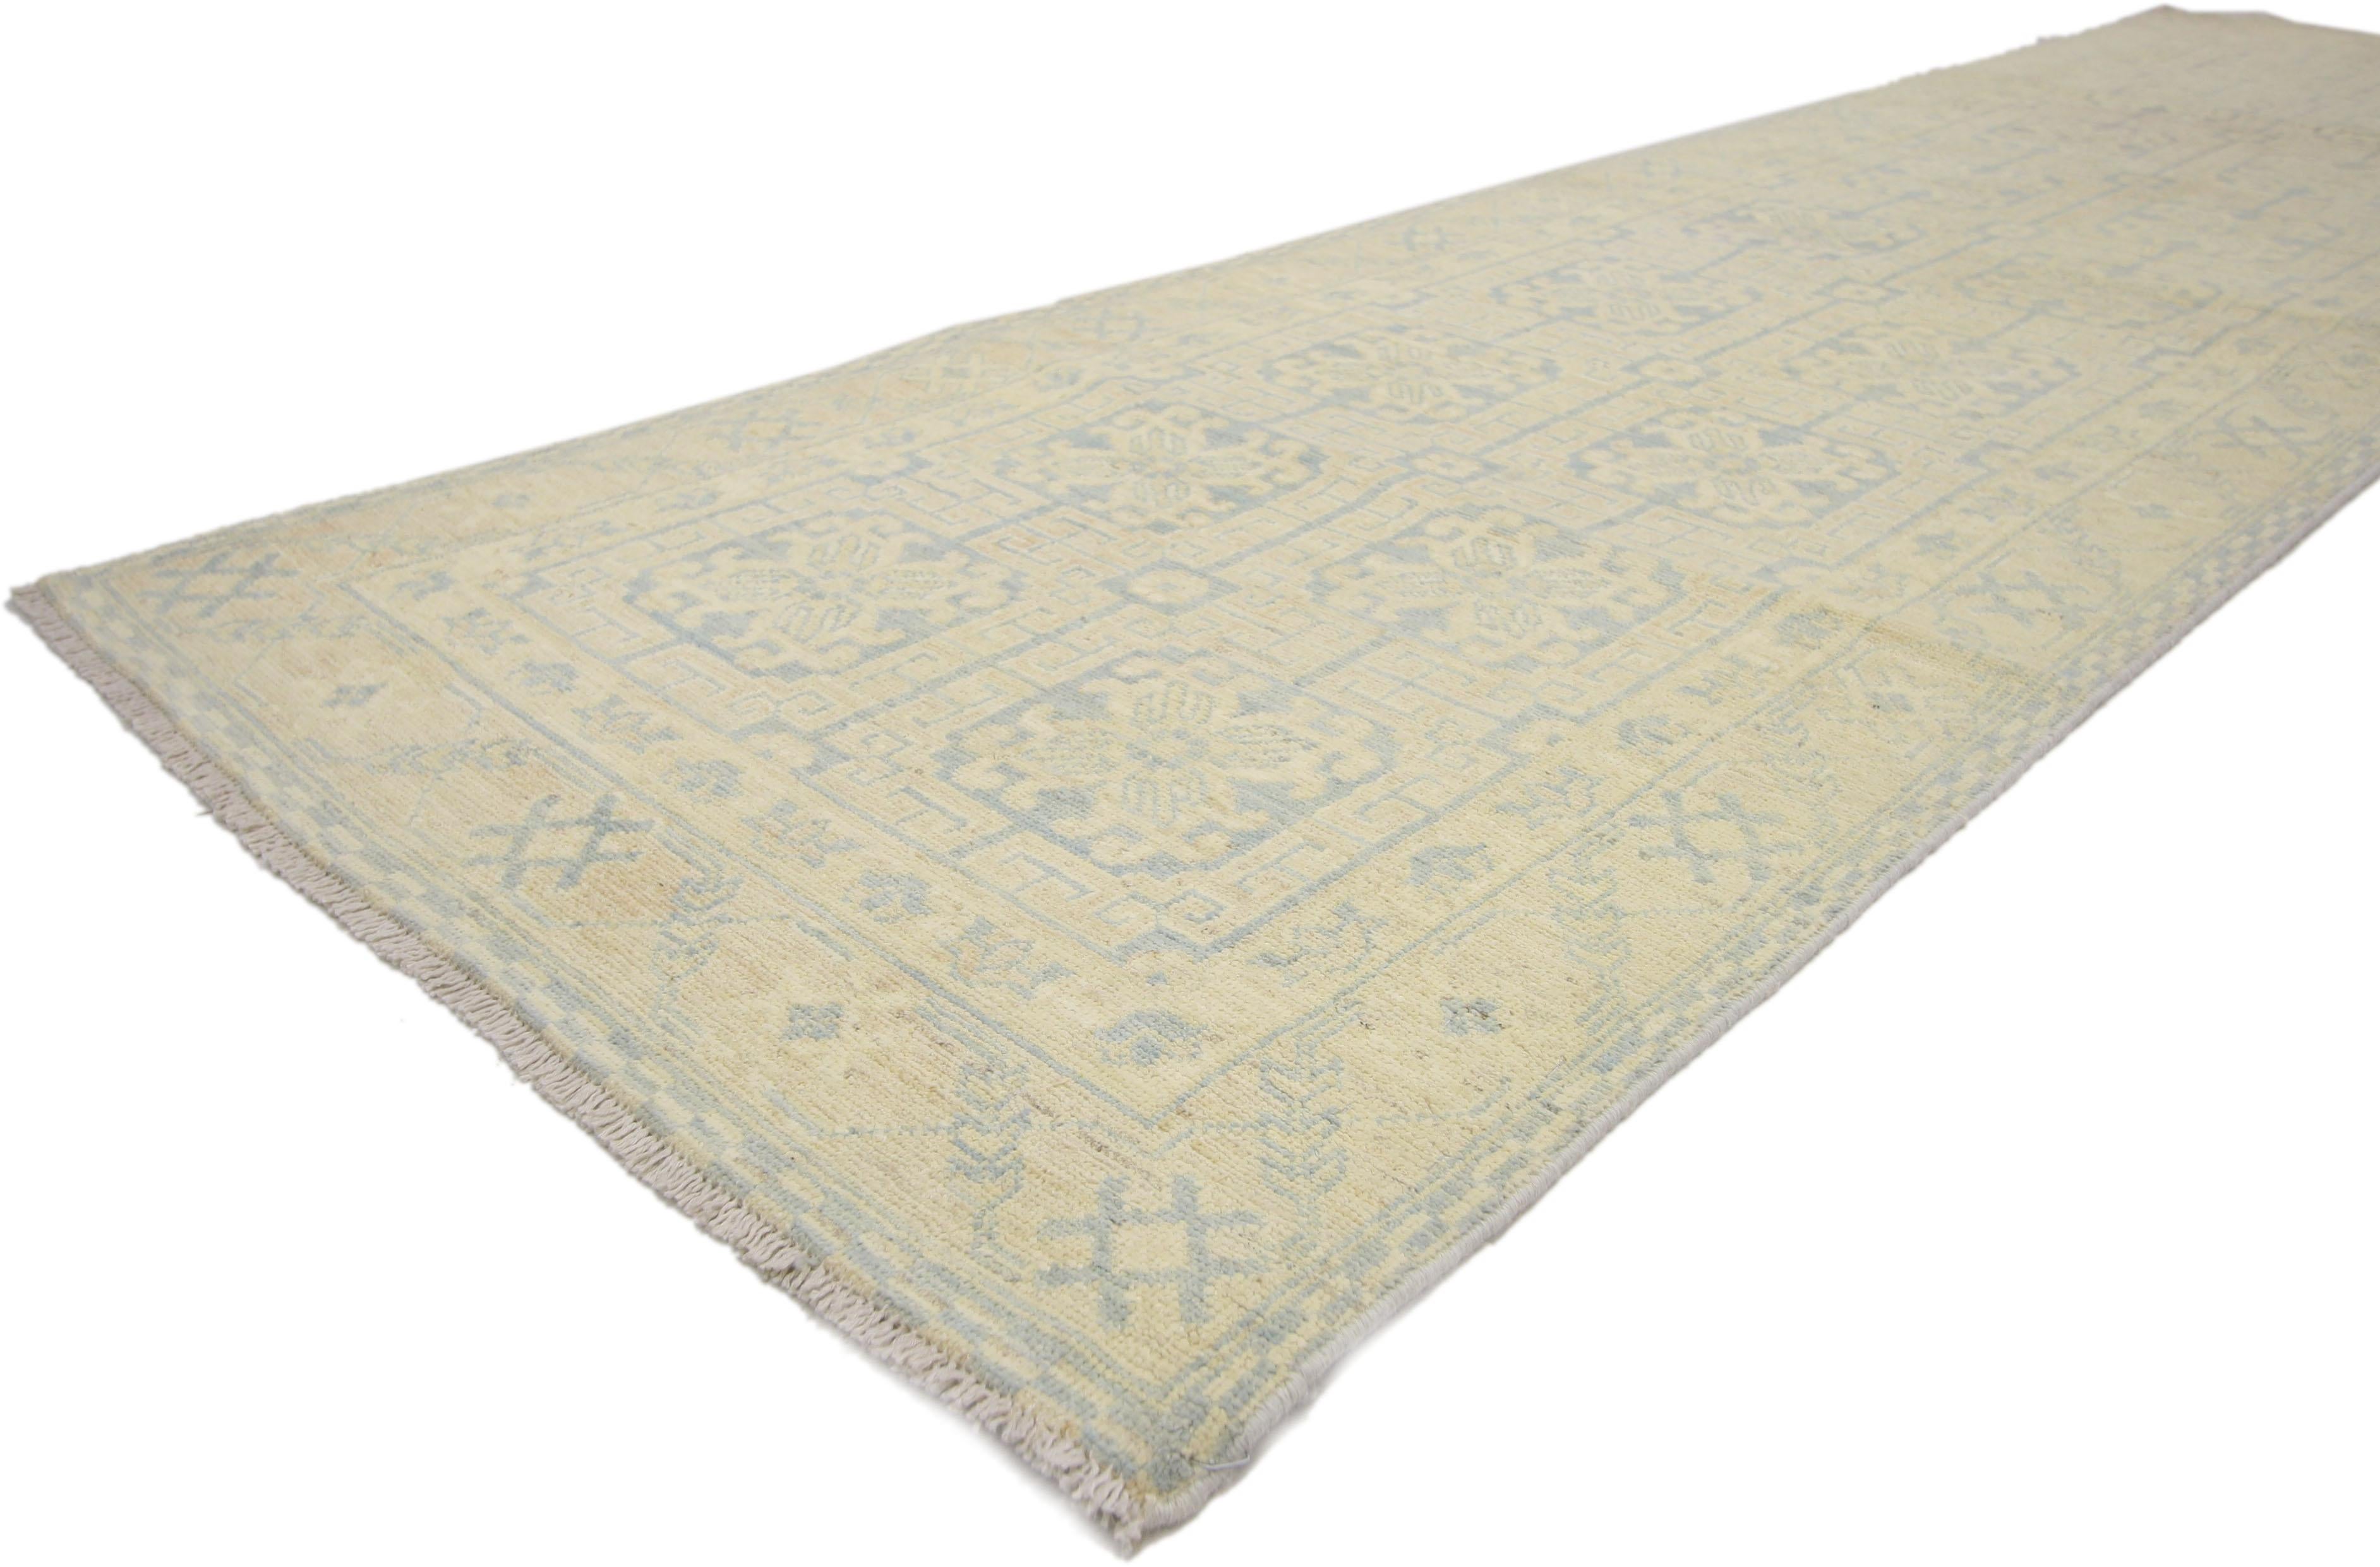 French Provincial French Country Khotan Style Runner, Farmhouse Hallway Runner